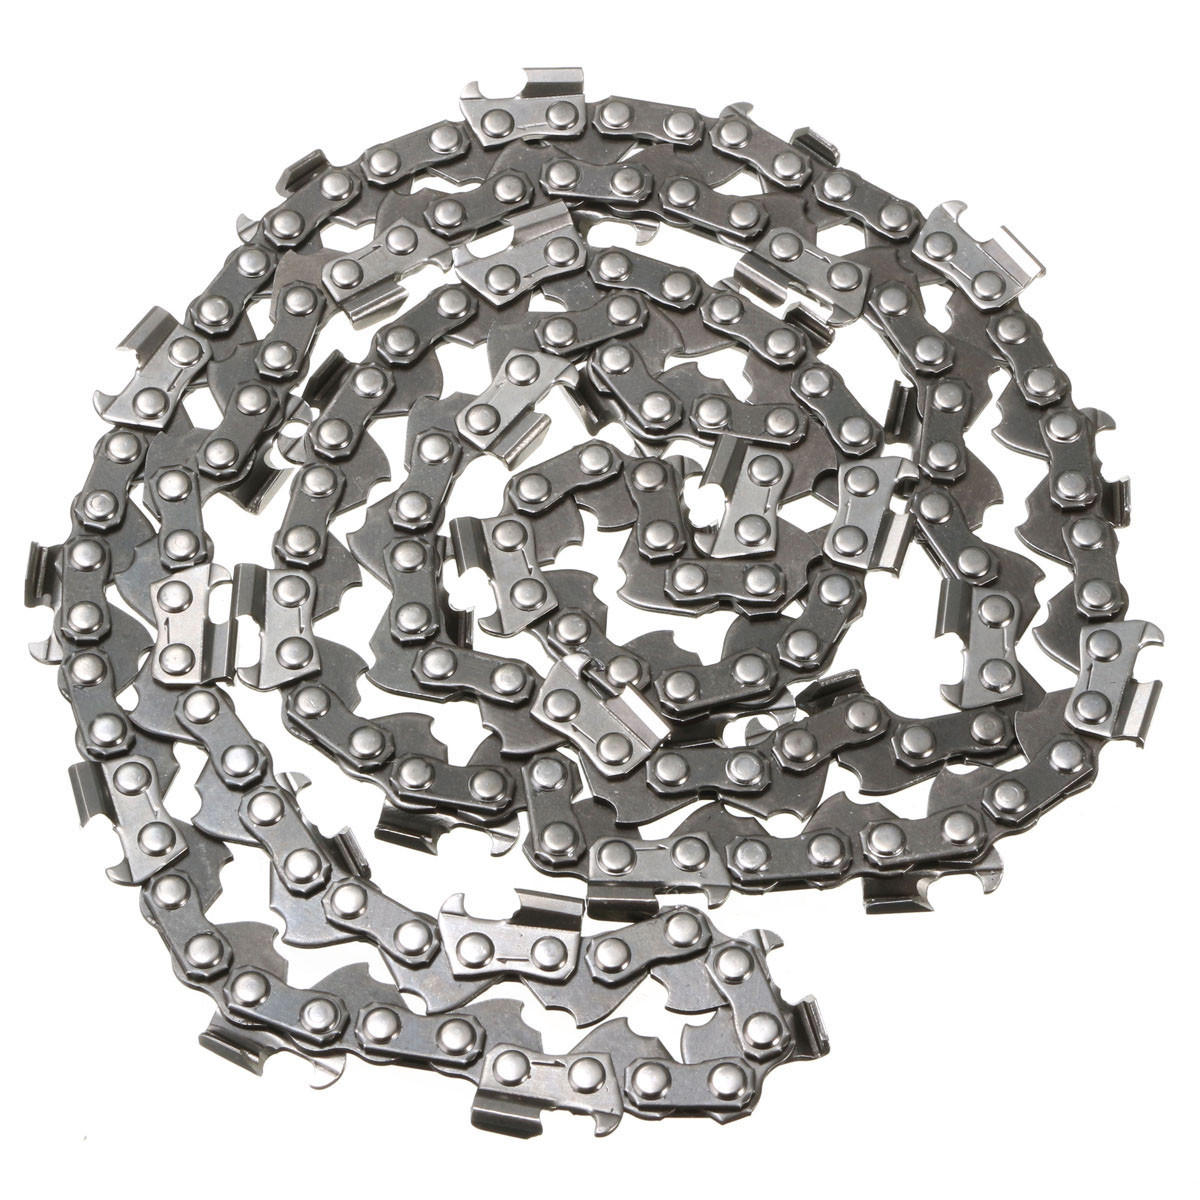 

20 Inch Chainsaw Saw Chain 76 Links Replacement Saw Mill Ripping Chain For Timberpro 62CC